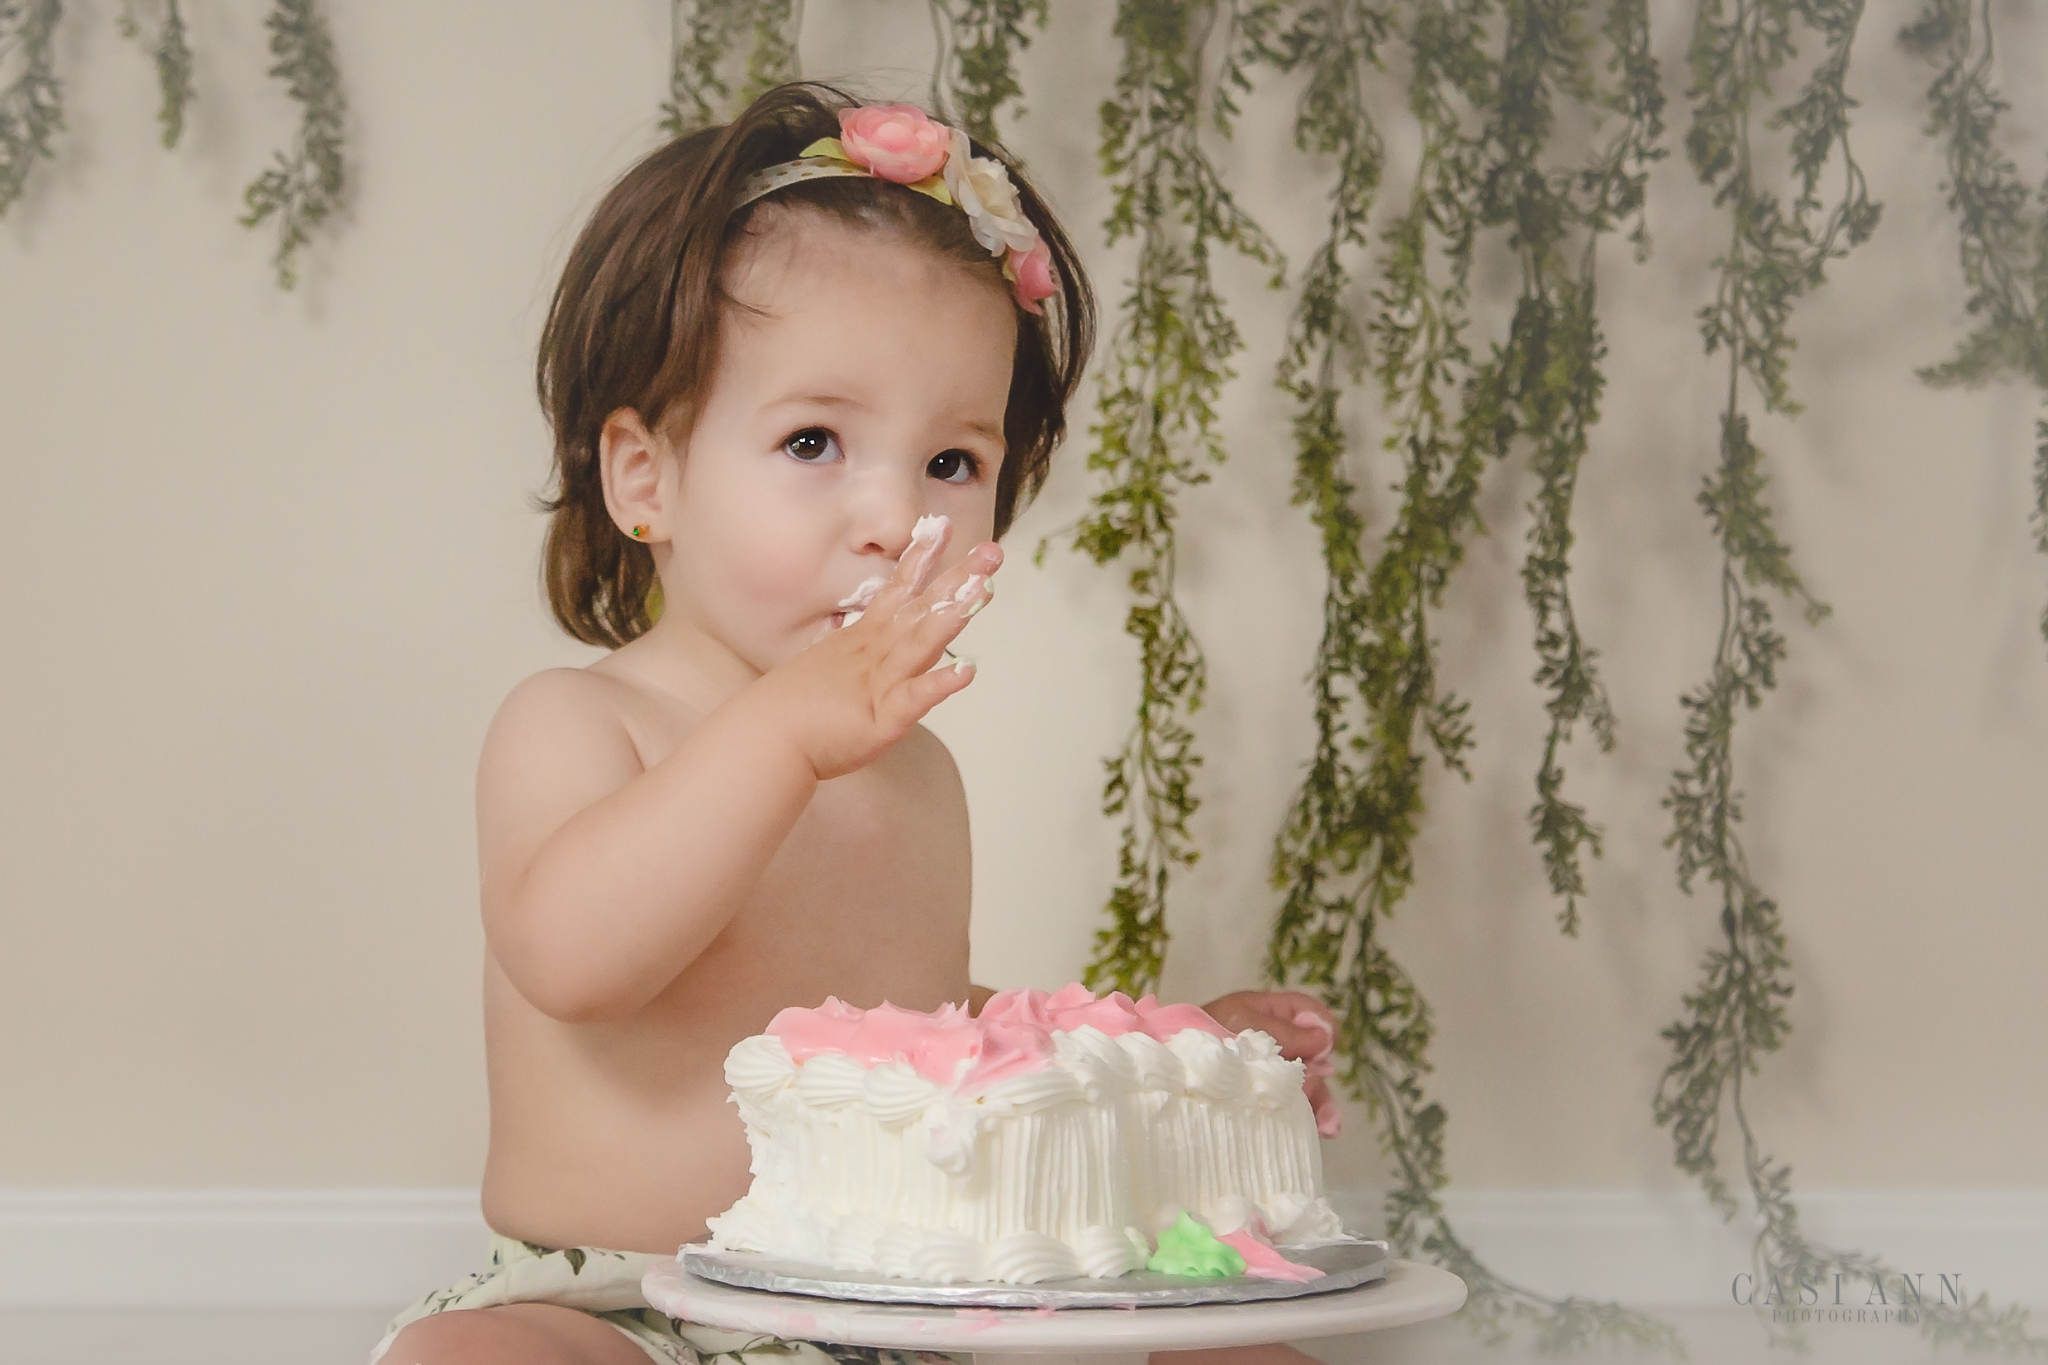 L's Birthday Cake Smash Session, mommy and me, daddy and me, sisters, siblings, girls, birthday, Studio Sitter Session, Watch Me Grow, Baby, Child, Photography, Session, Casi Ann Photography, studio, 12 month, milestone, sitter, 1 year, romper, vines, lemons, Ingleside, Lindenhurst, Illinois, portrait, kids, 3 years